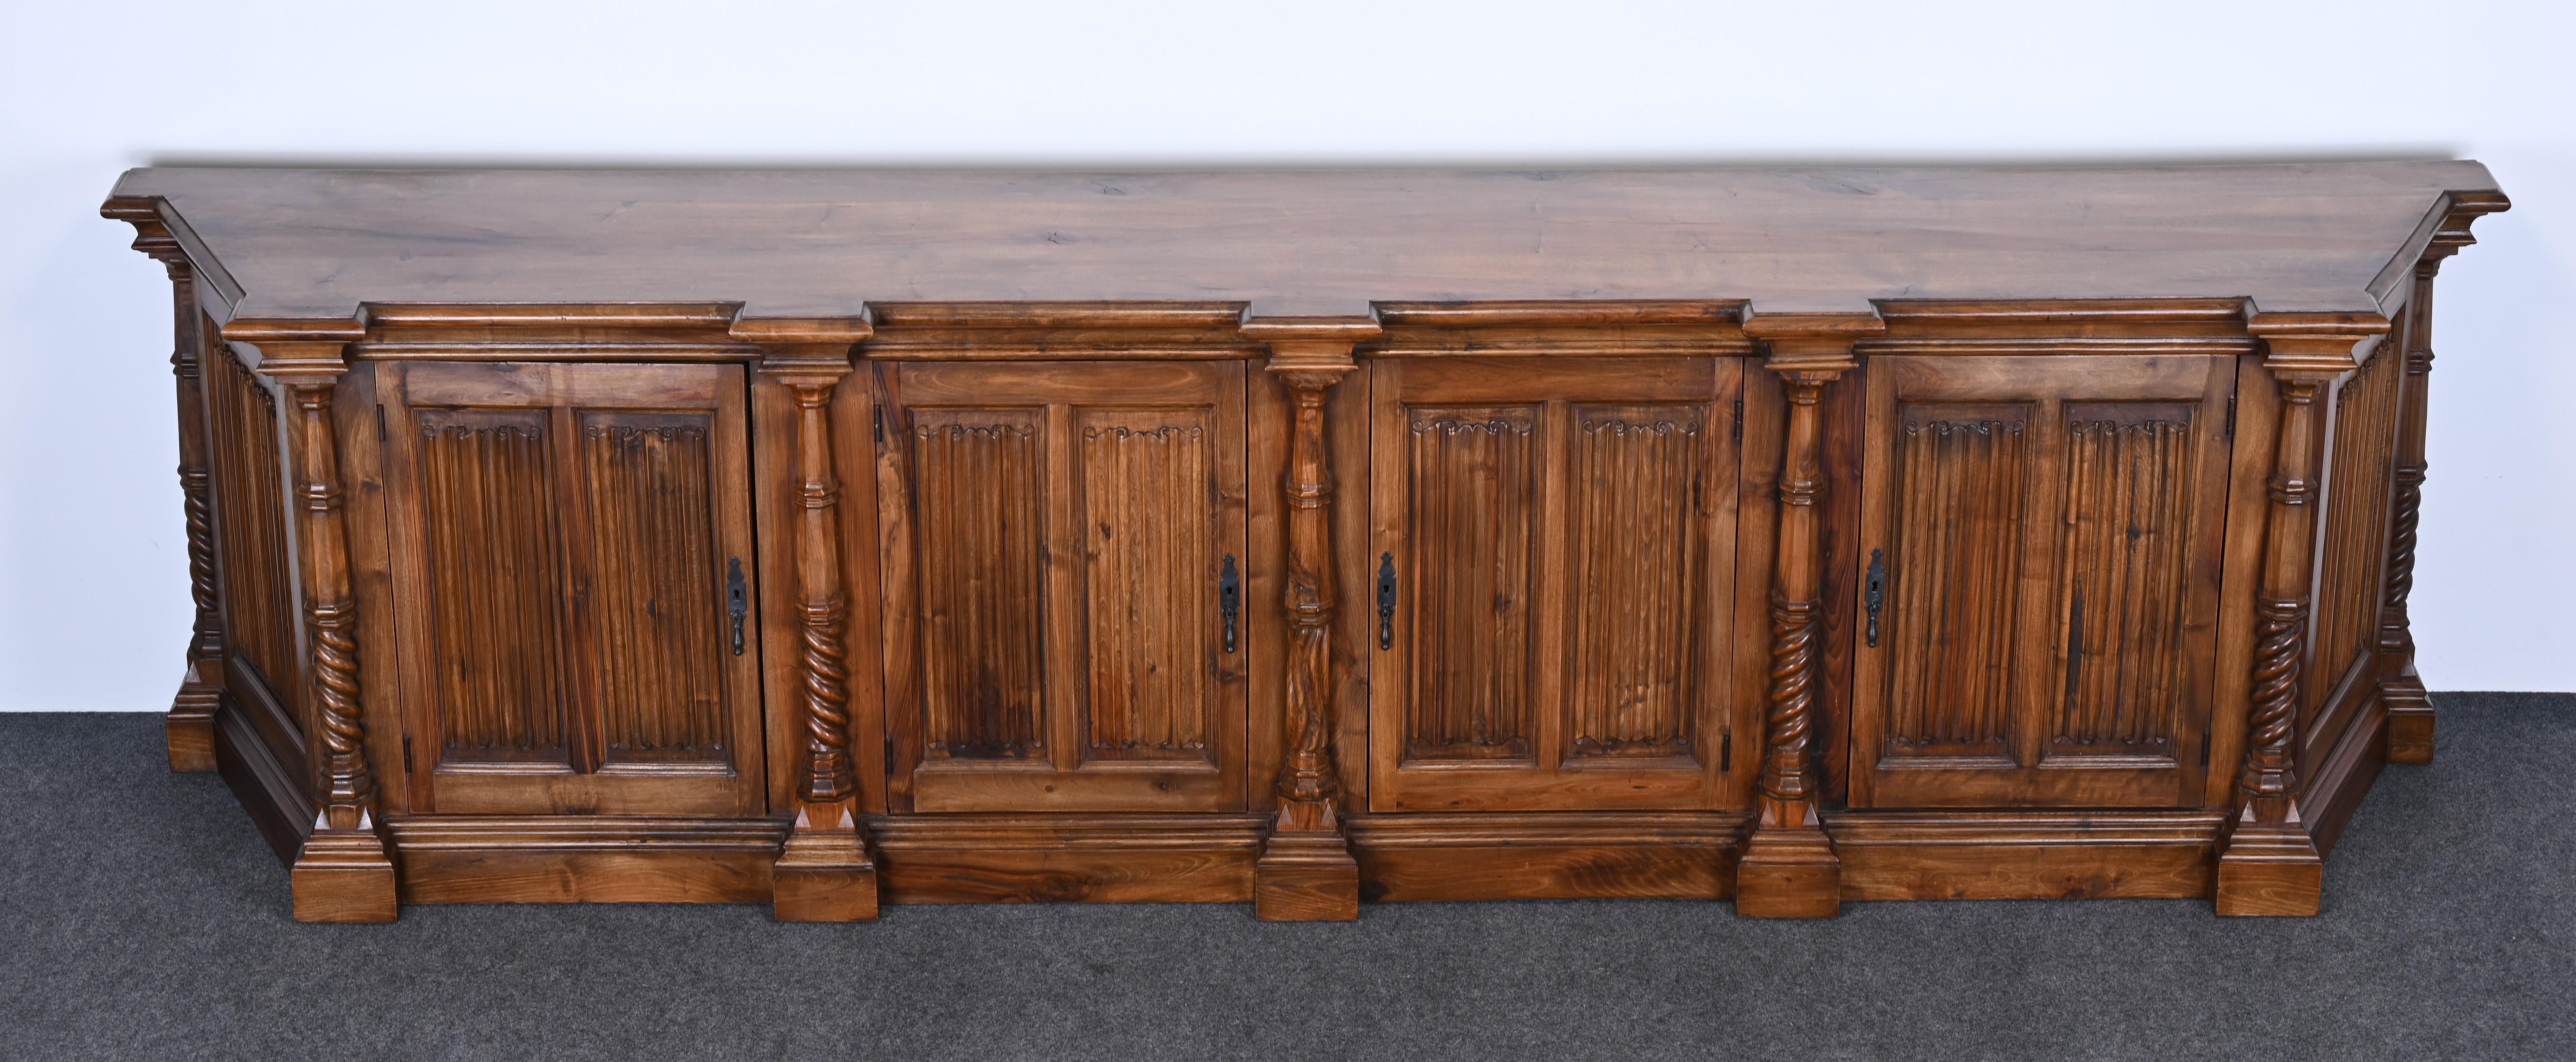 Spanish Colonial Monumental Spanish Revival Sideboard, 1960s